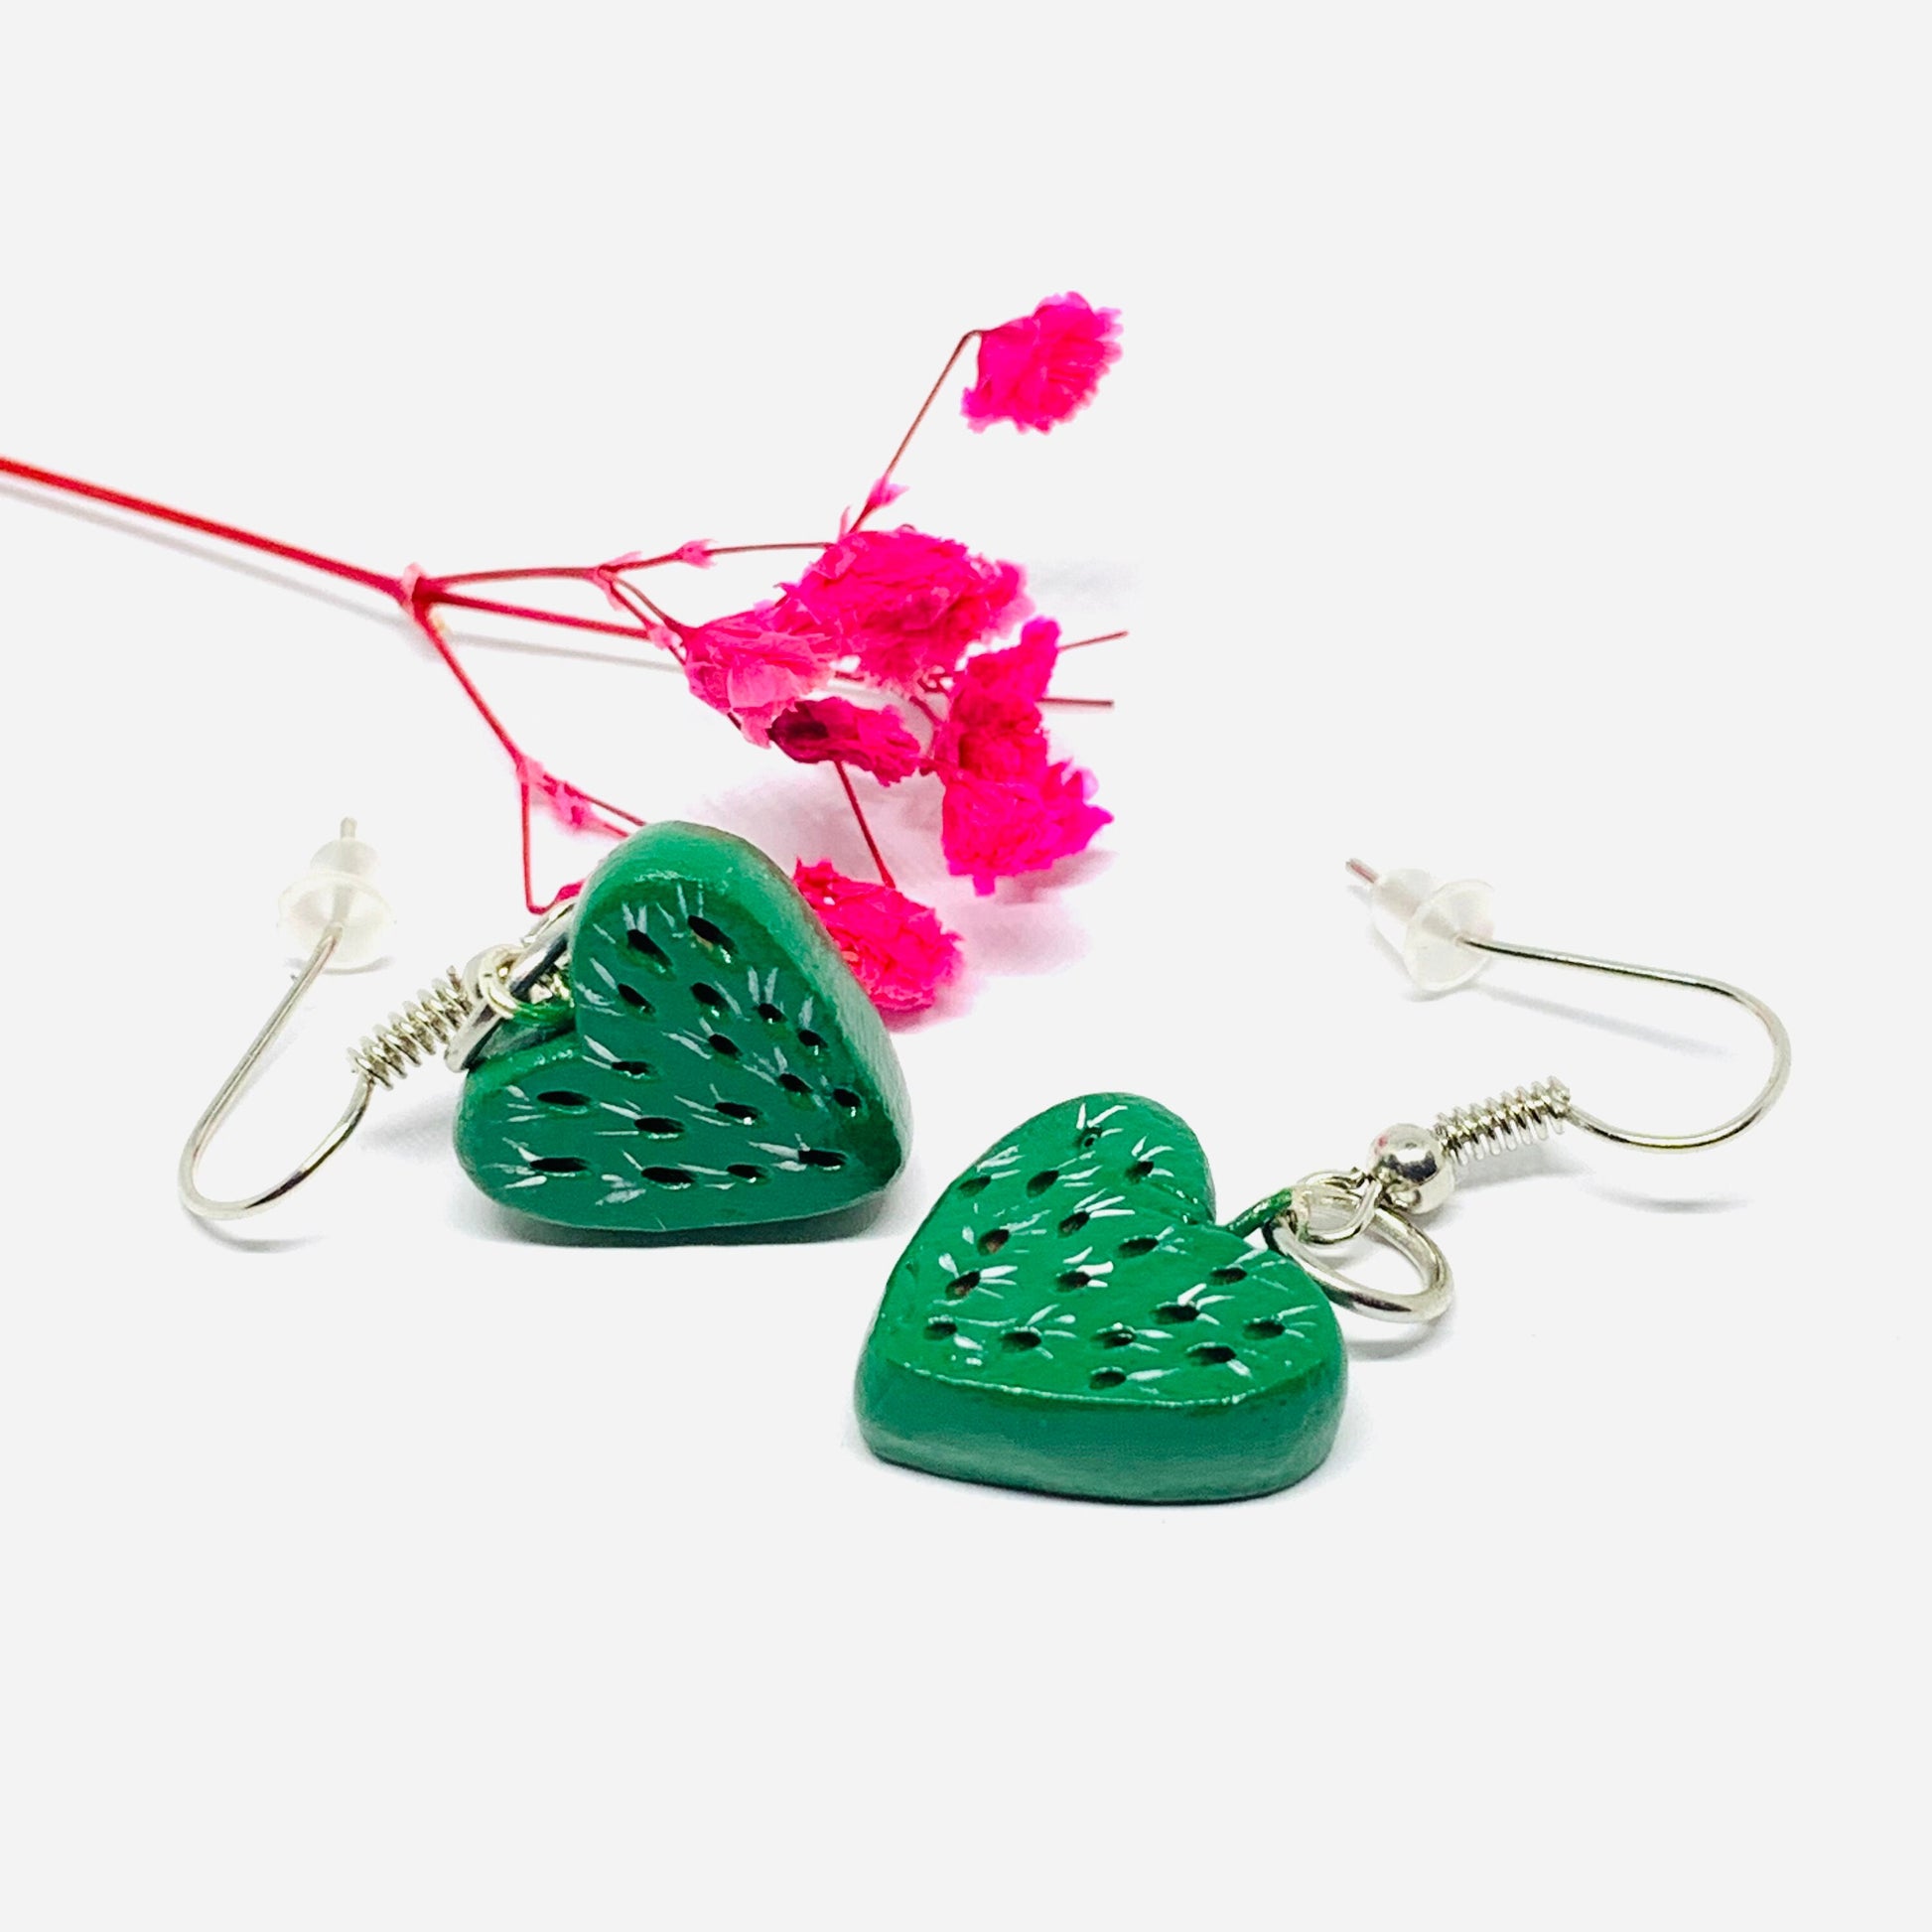 Charming Cactus Heart Clay Earrings Mexico MexiChic Girl Women Fashion Summer Jewelry WearableArt Aretes Gift Corazon Nopal Mujer Claywelry